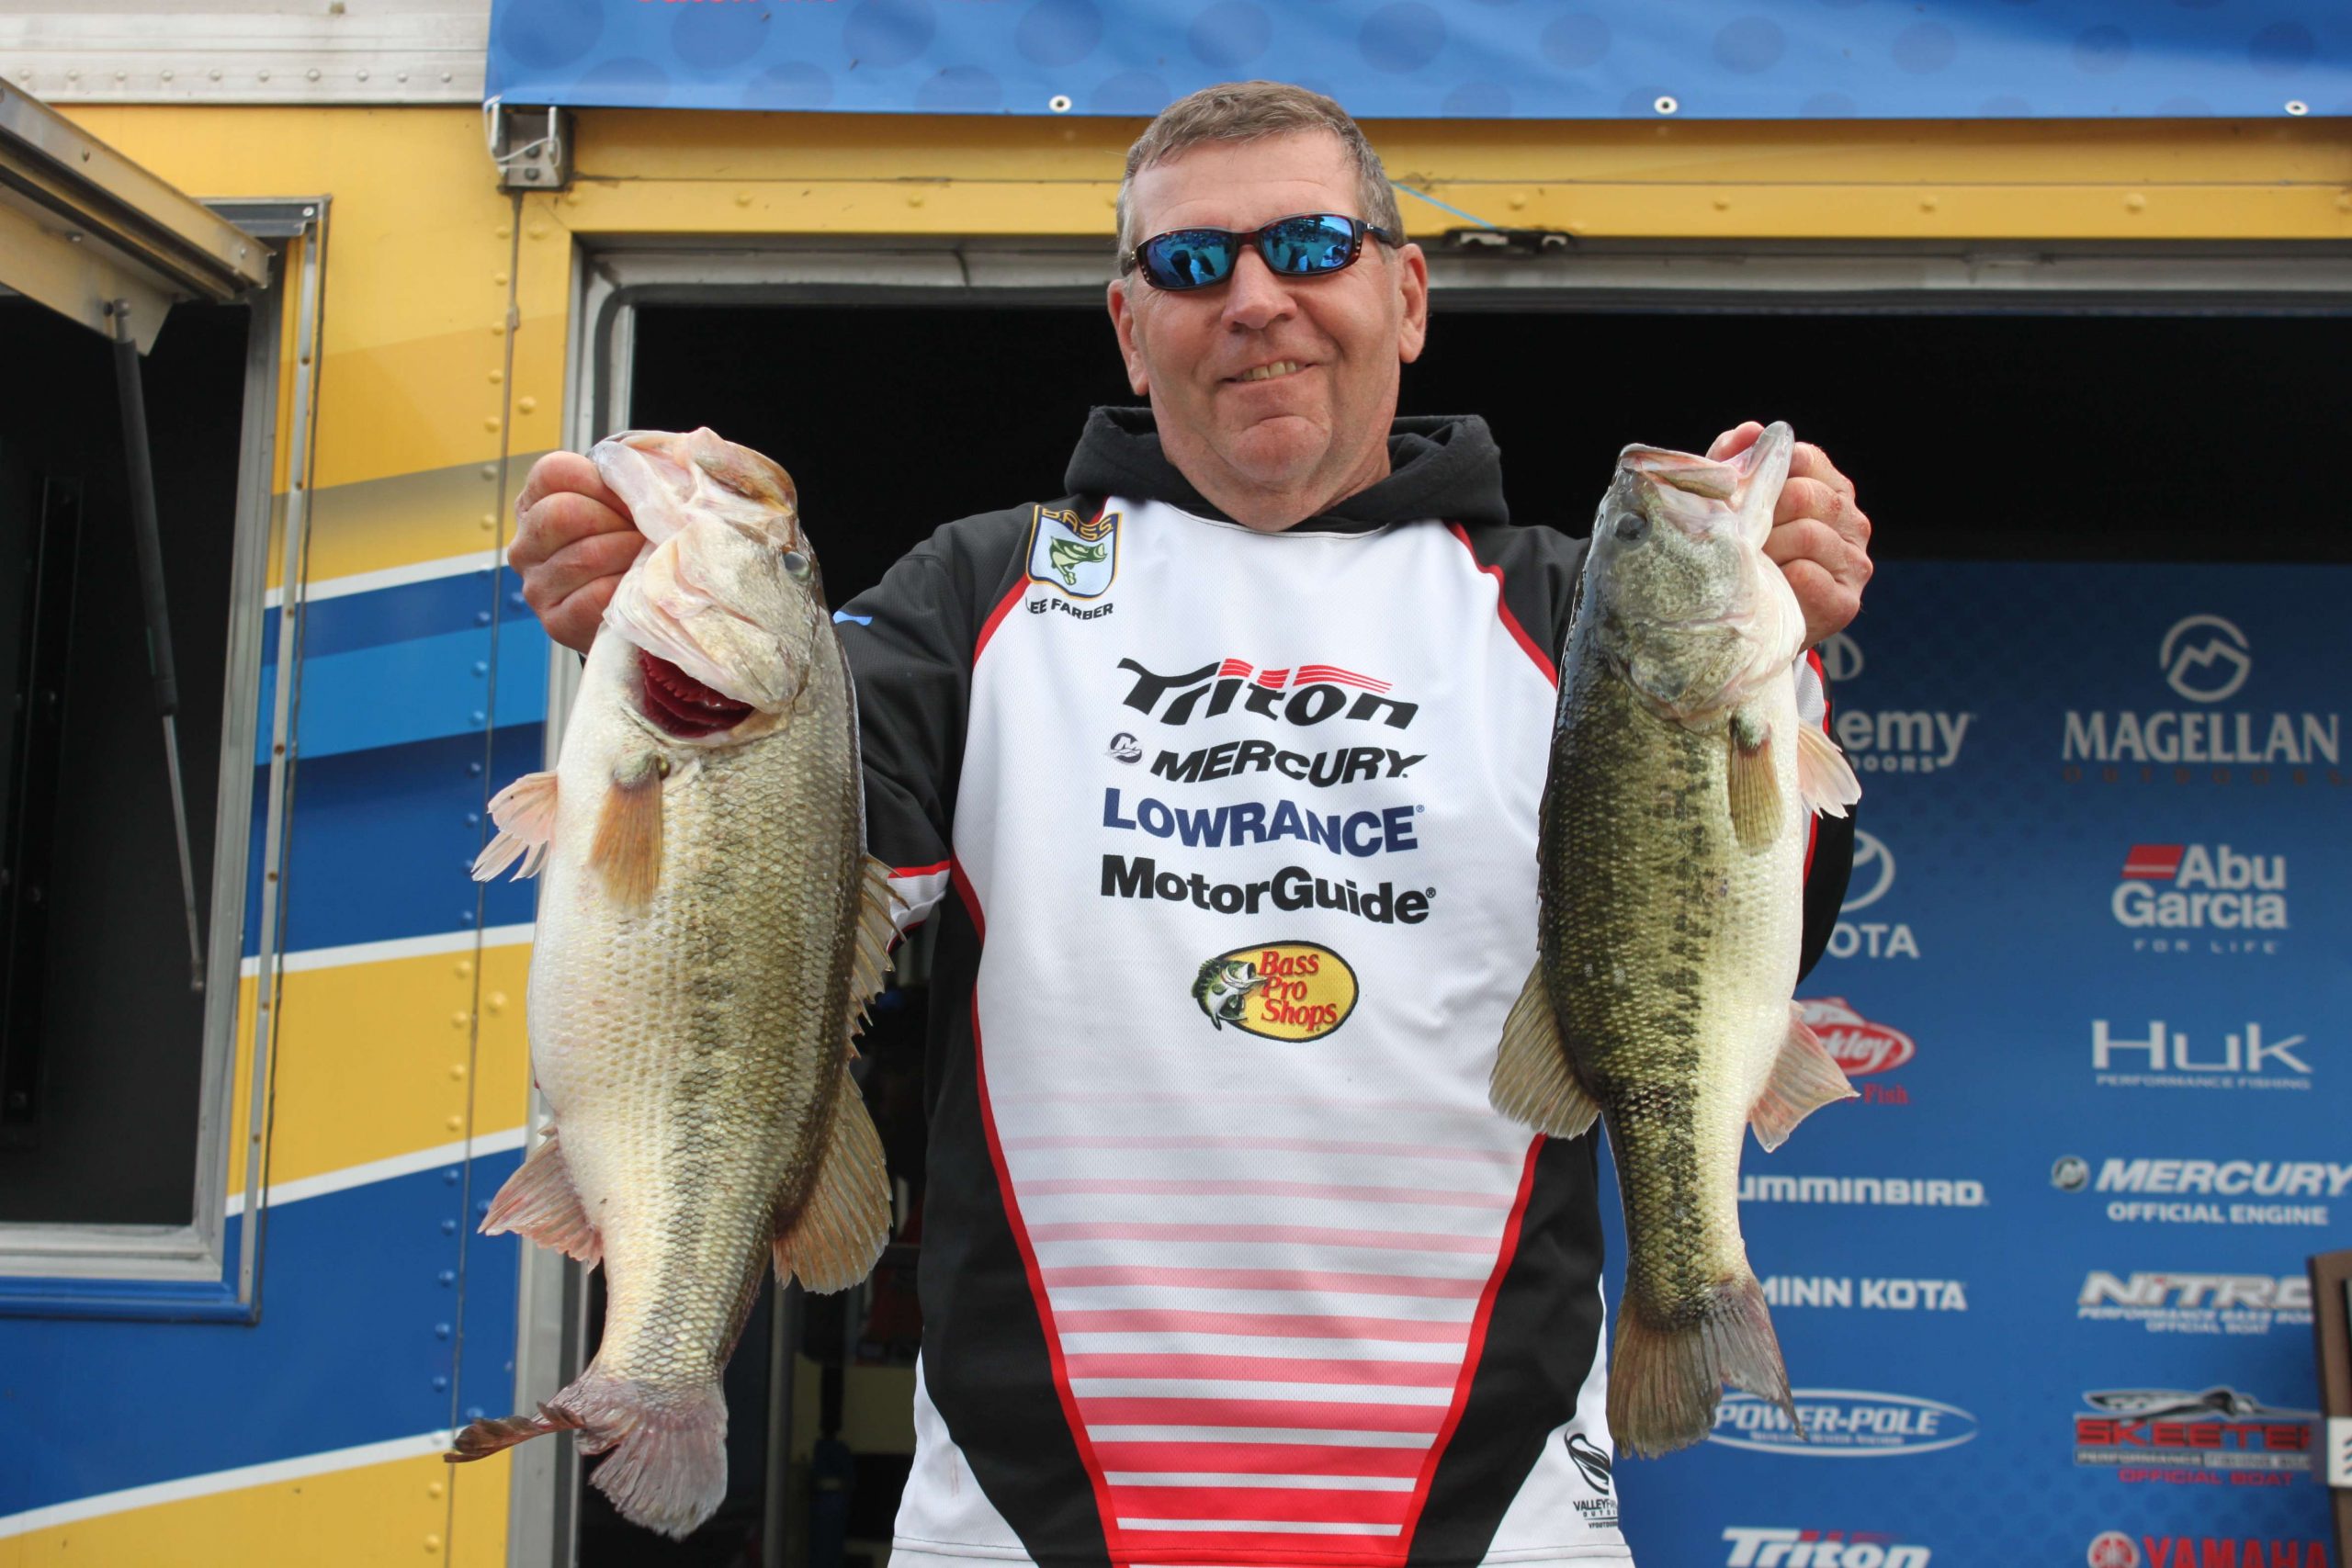 Lee Farber of Minnesota had the third-highest bag on Friday. His limit of 20 pounds jumped him into 15th place among boaters with 43-7 overall.